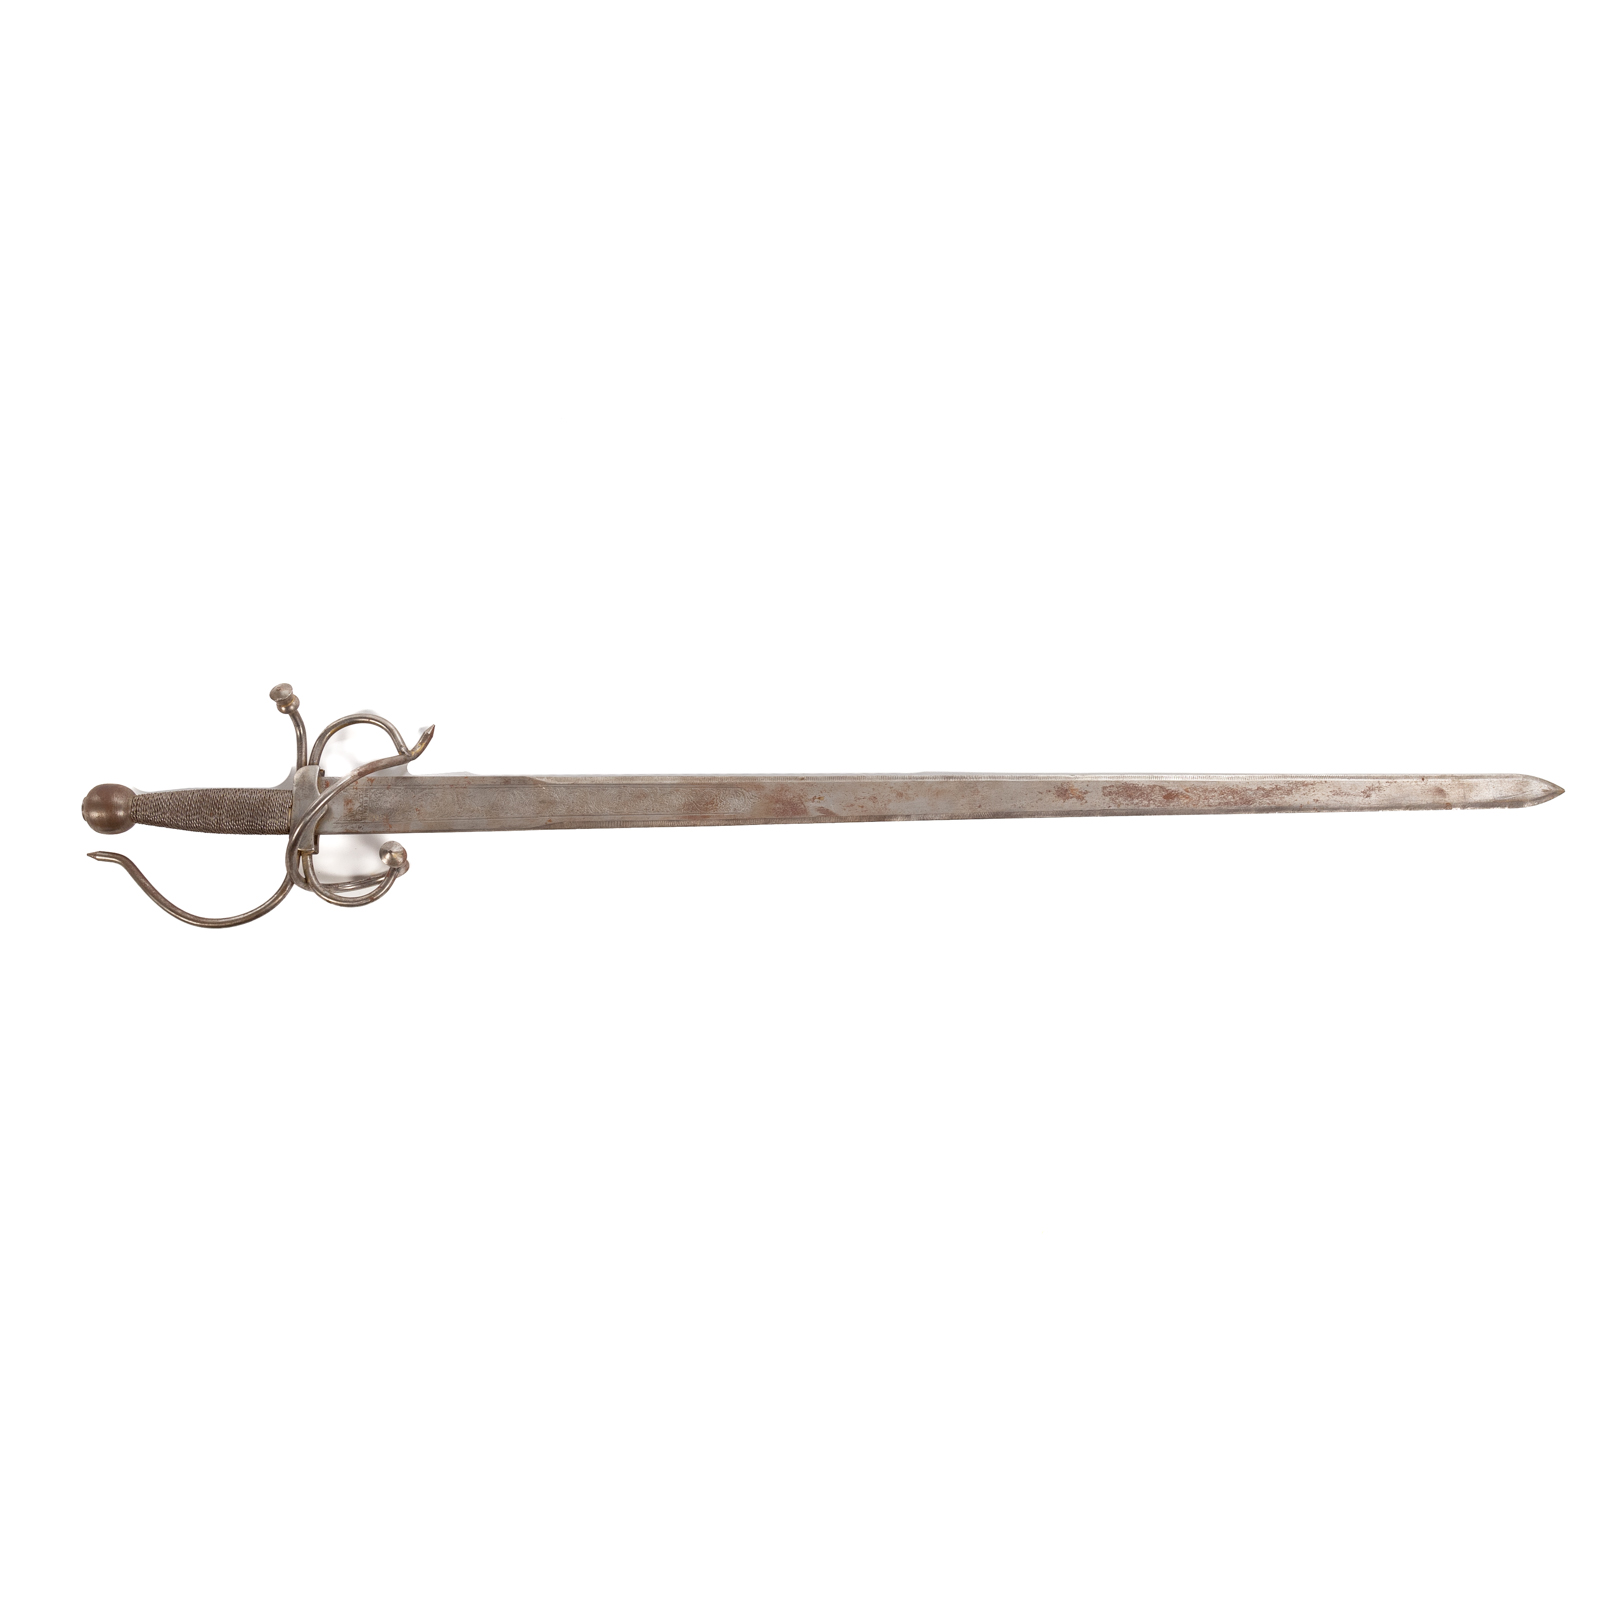 SPANISH MADE REPRODUCTION SWORD